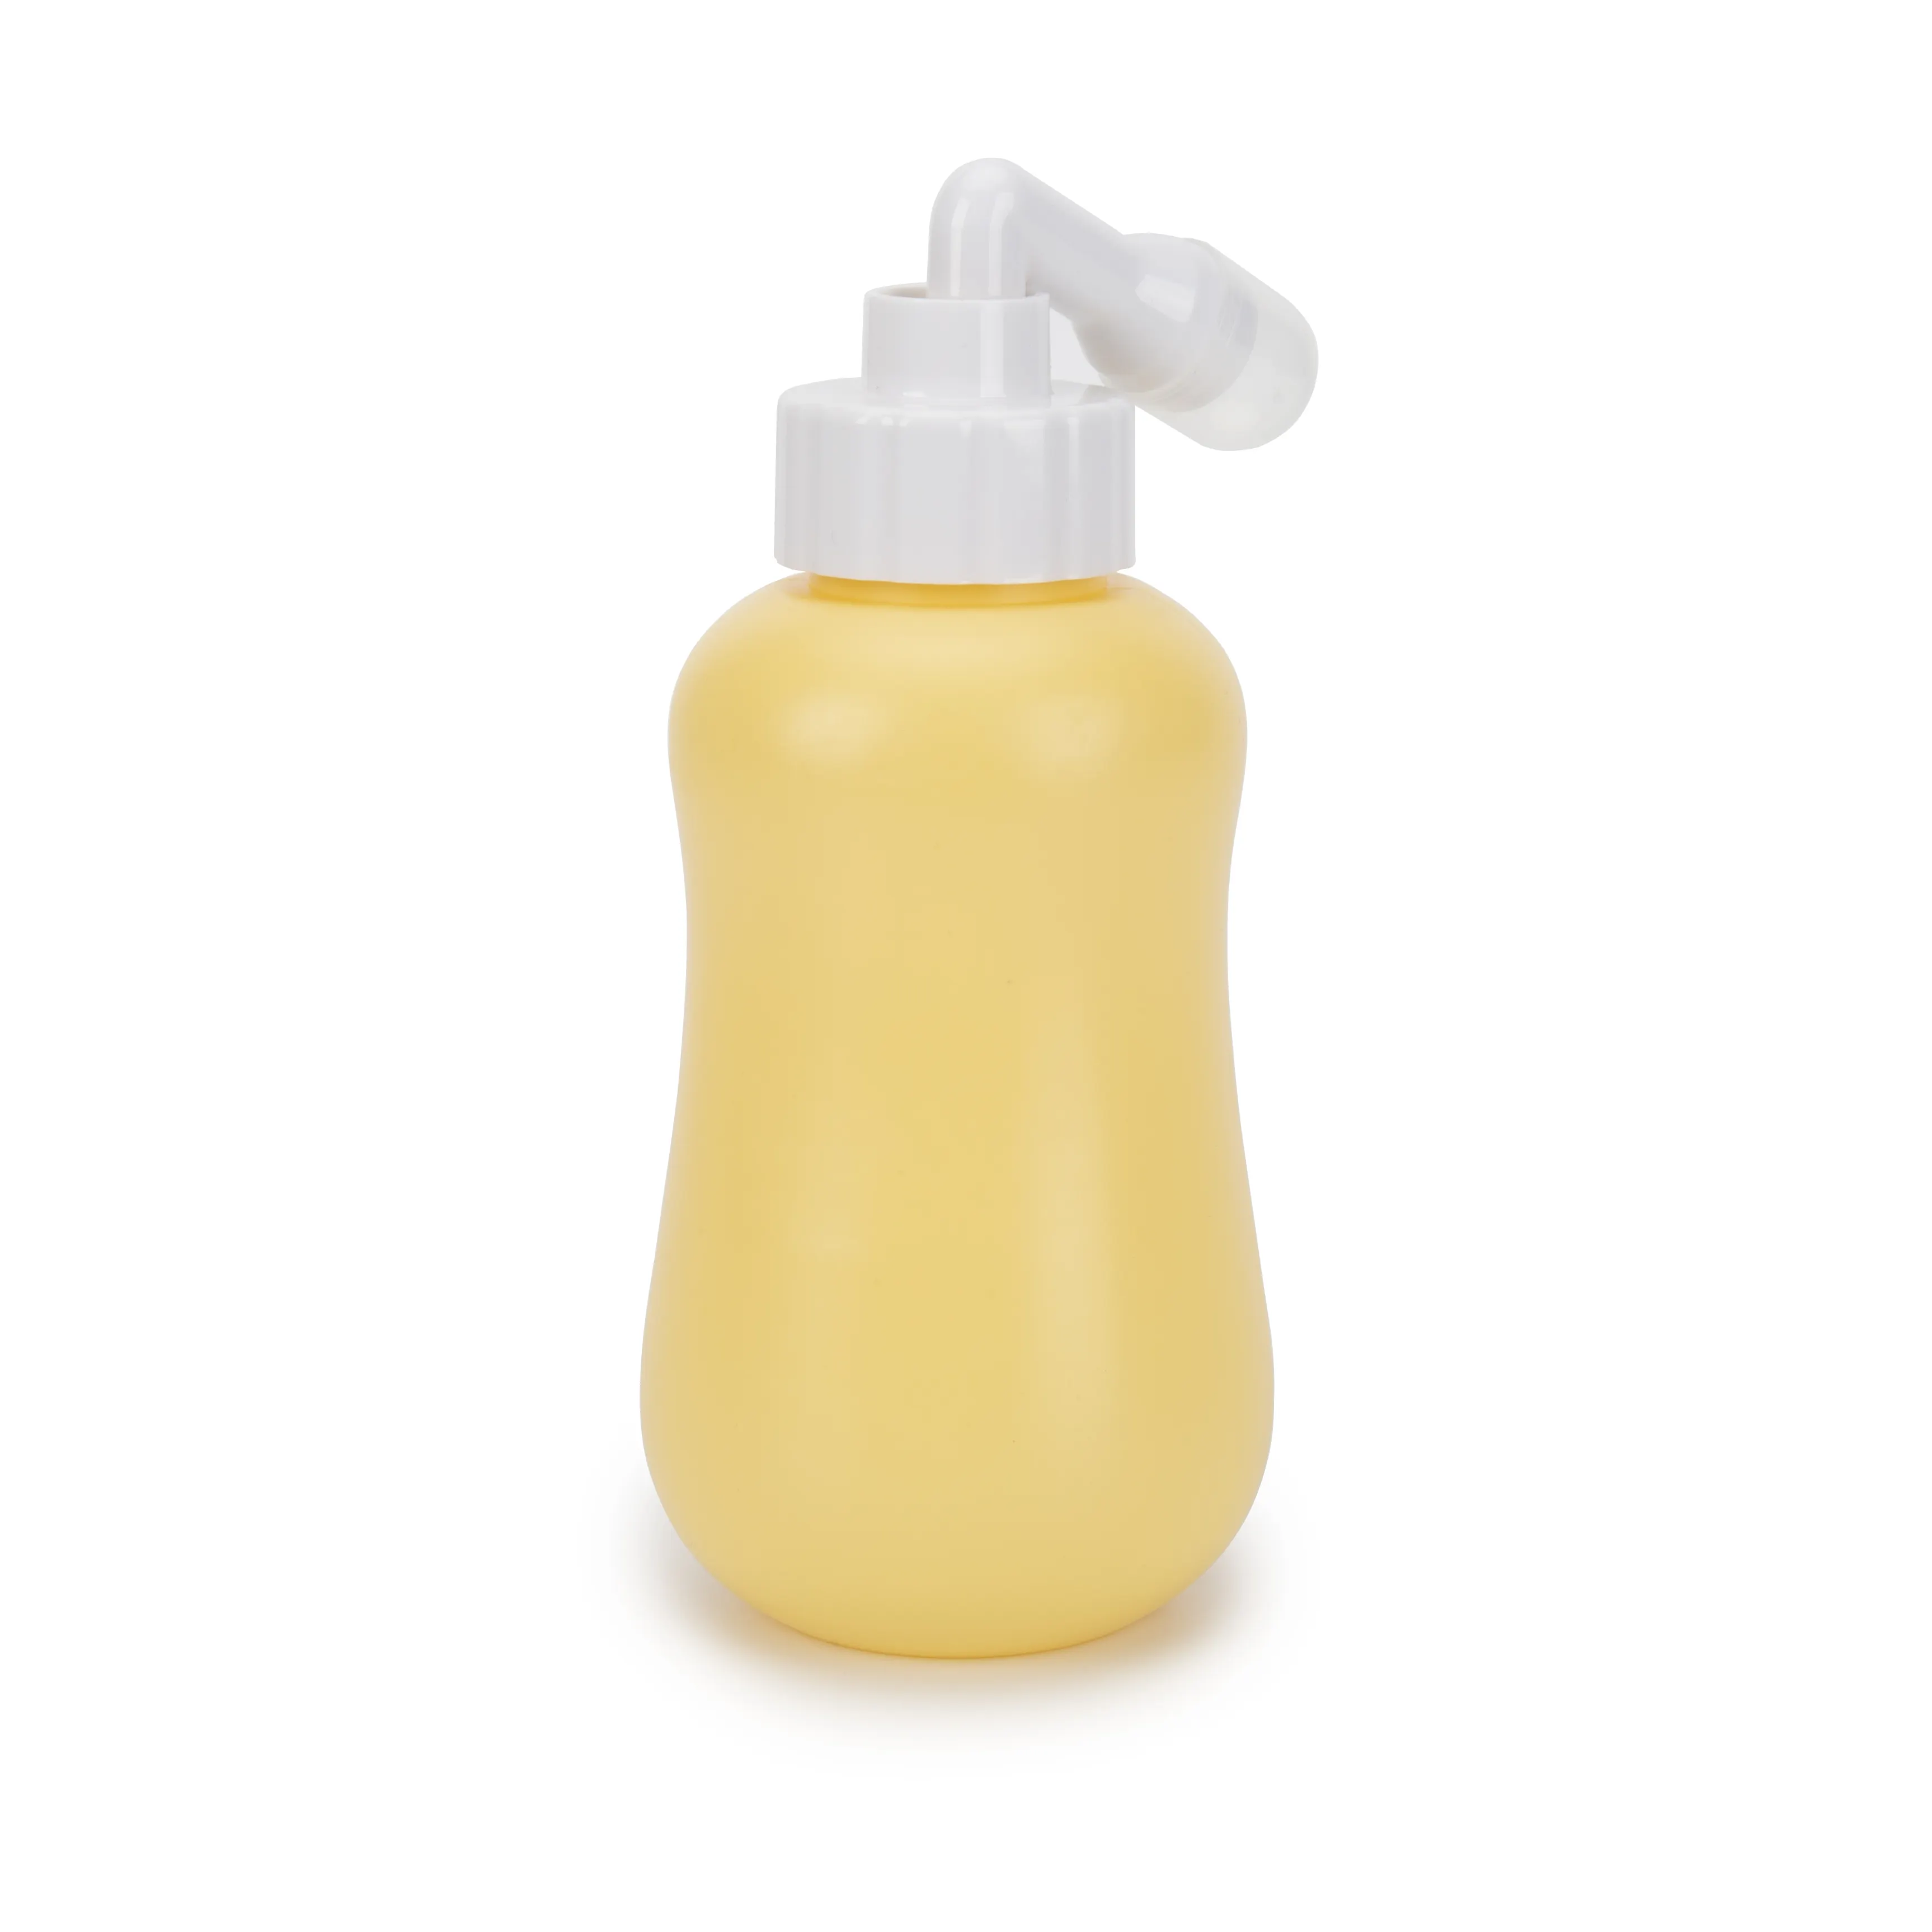 Wholesale Peri Bottle For Perineal Care, Hot Selling Baby Travel Bathing Kit, Oem/Odm Retractable Nozzle Portable Bidet